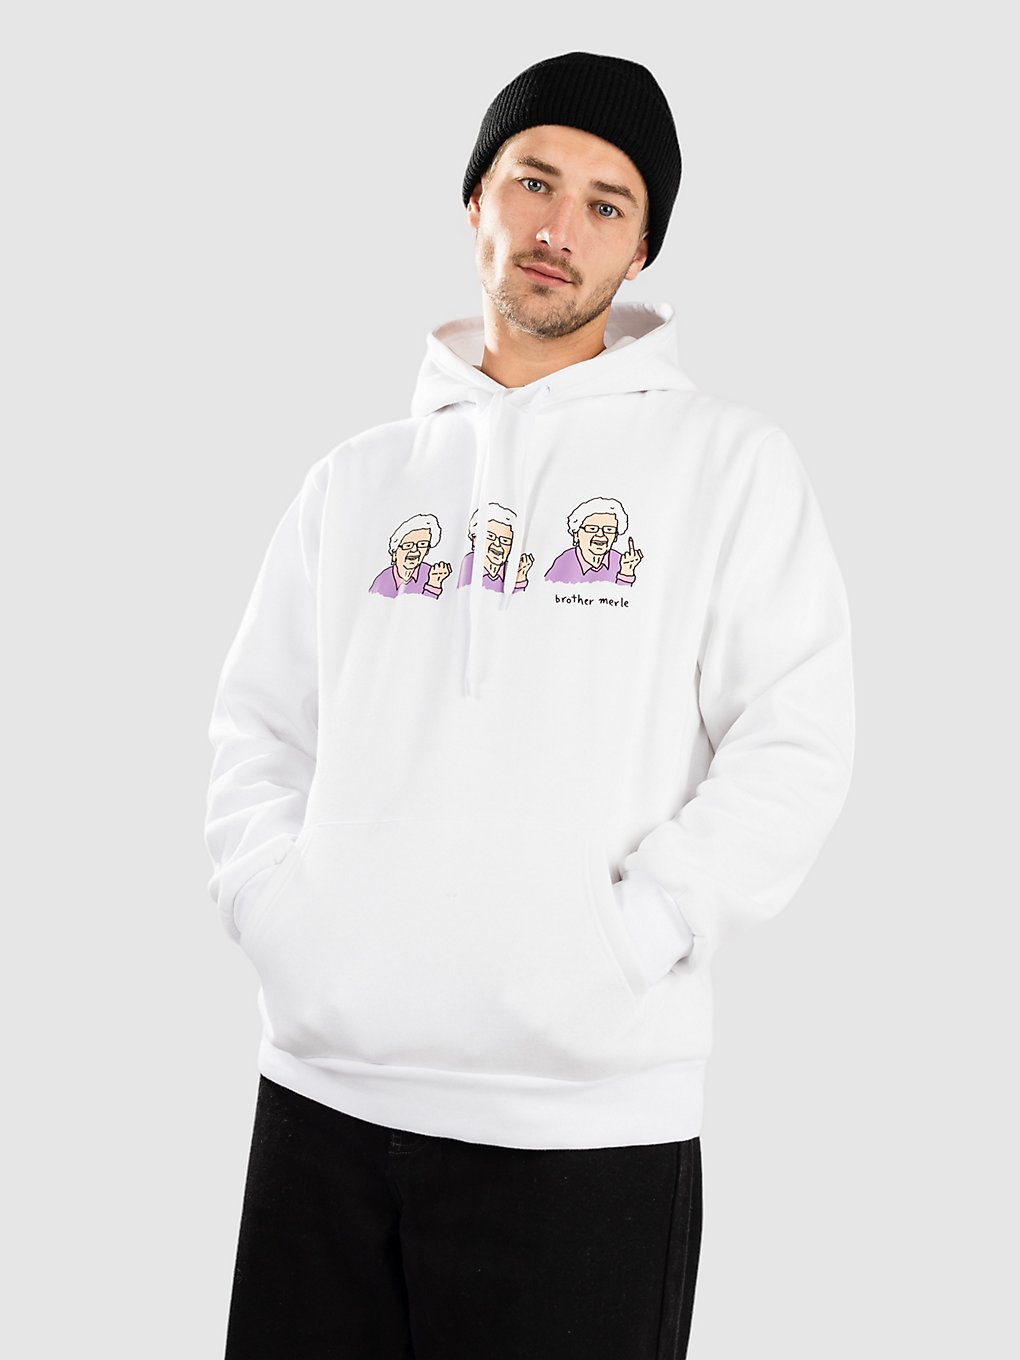 Brother Merle Betty Sequence Hoodie white kaufen